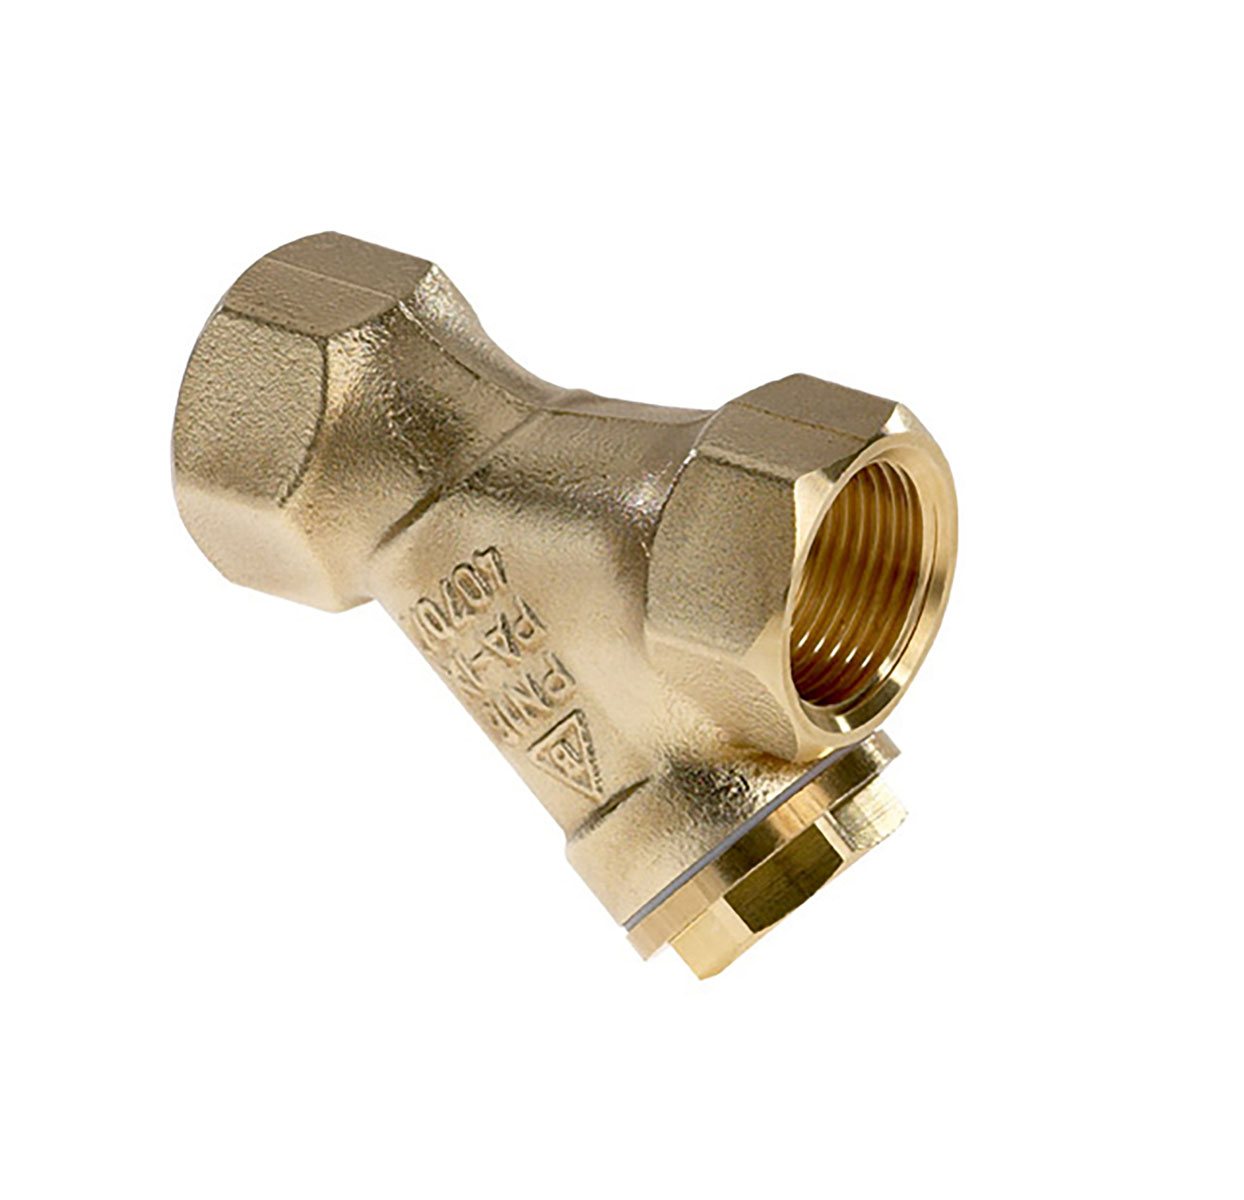 1450500 - CR-Brass Strainer Strainer with PTFE-sealing (Teflon)